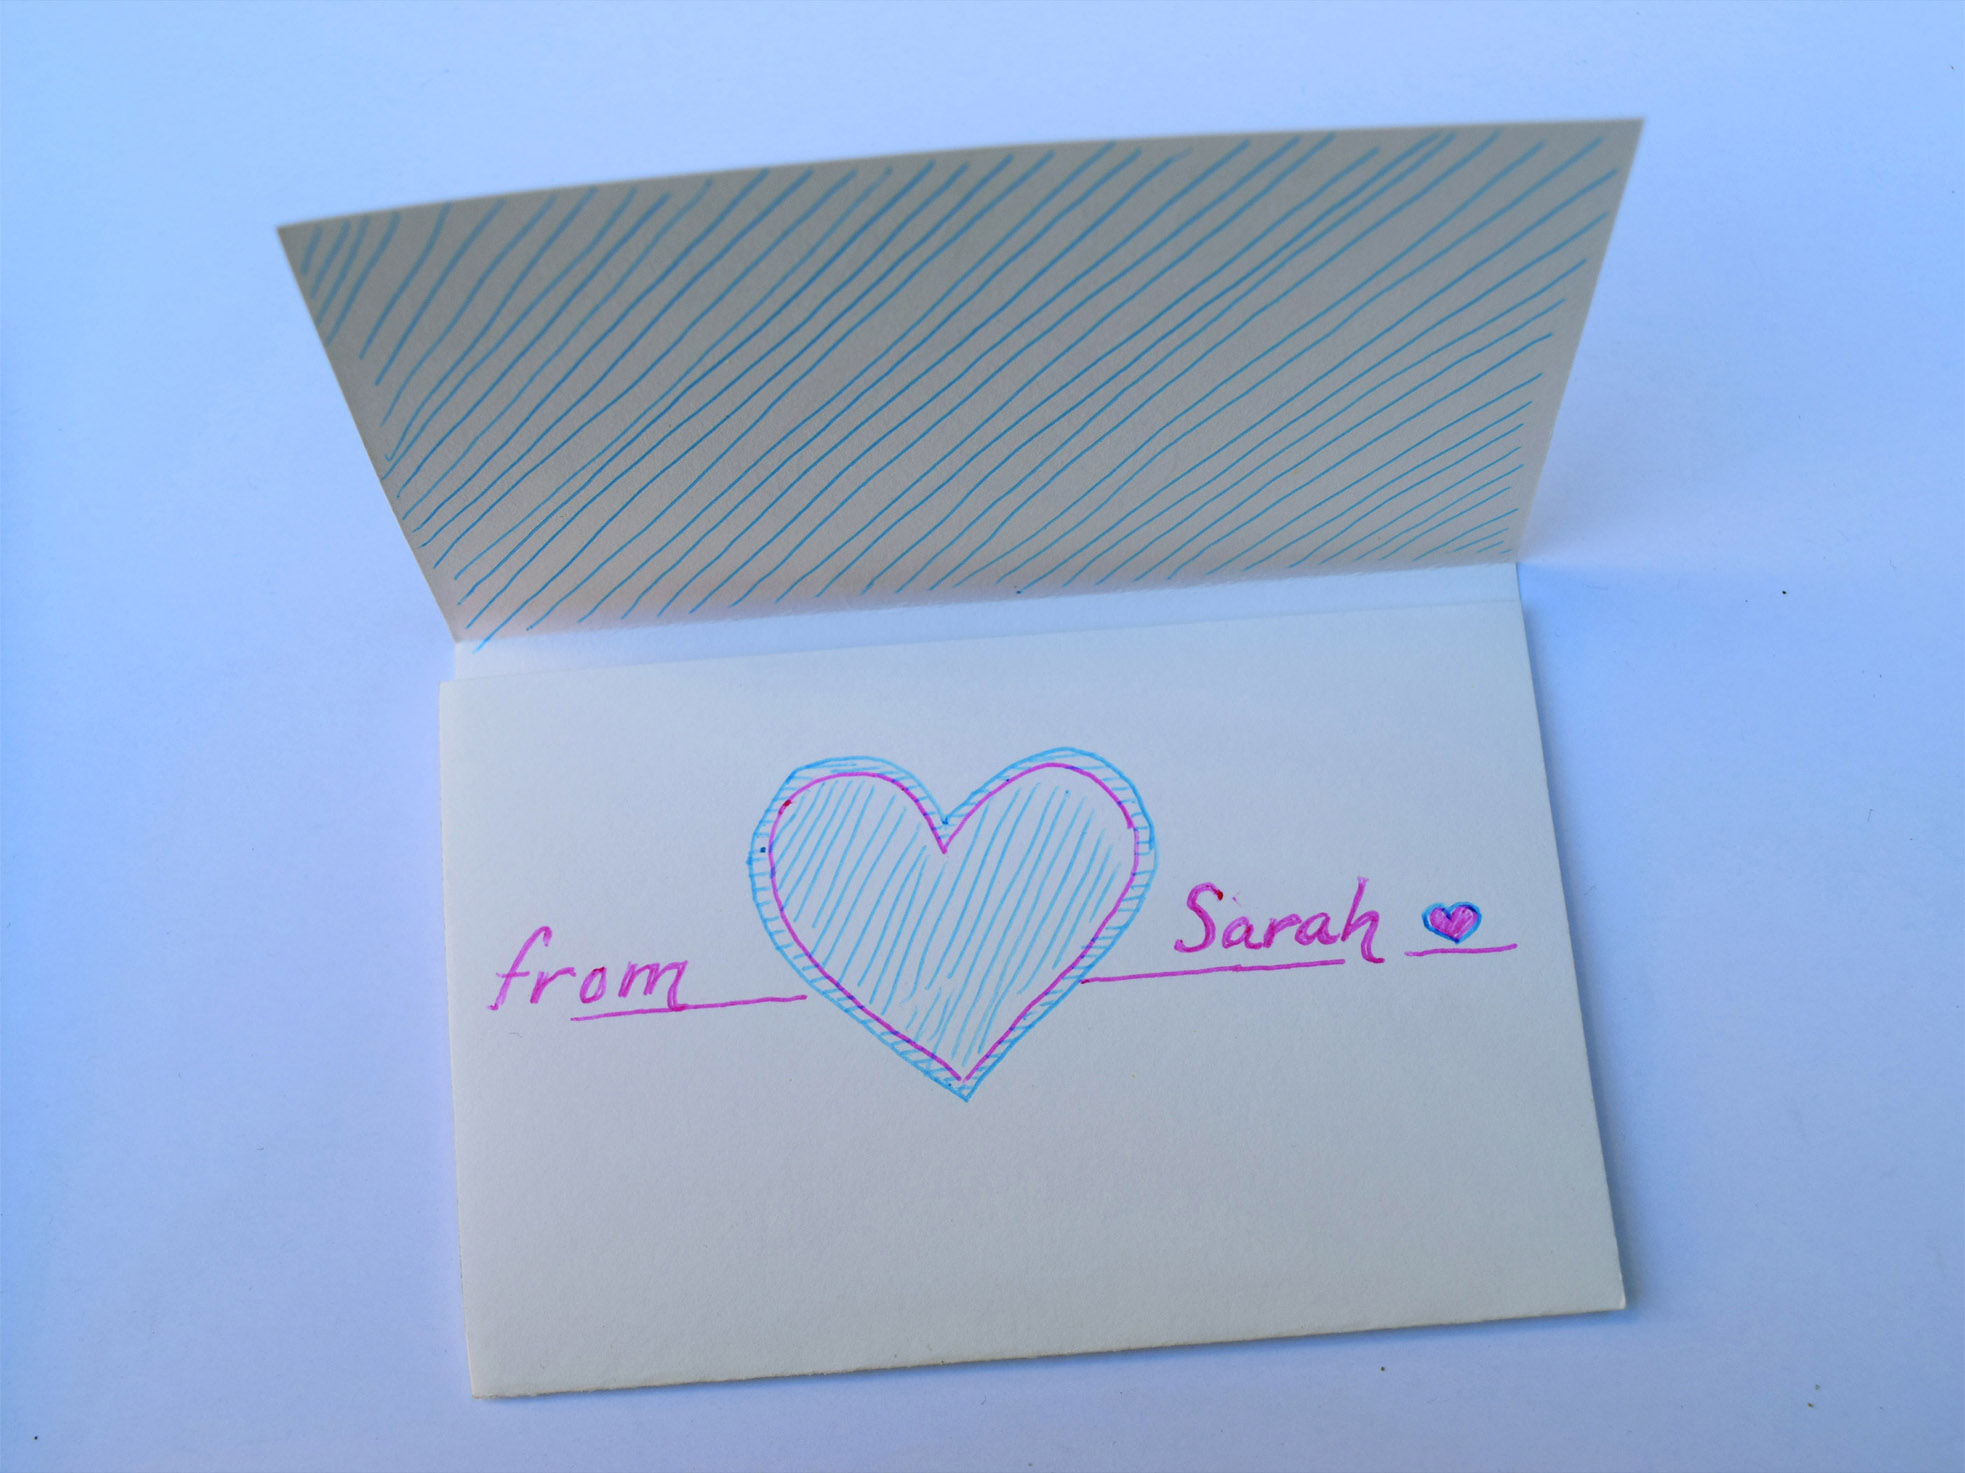 Half-open letter with the text 'from Sarah' written on the front around a drawn, large heart